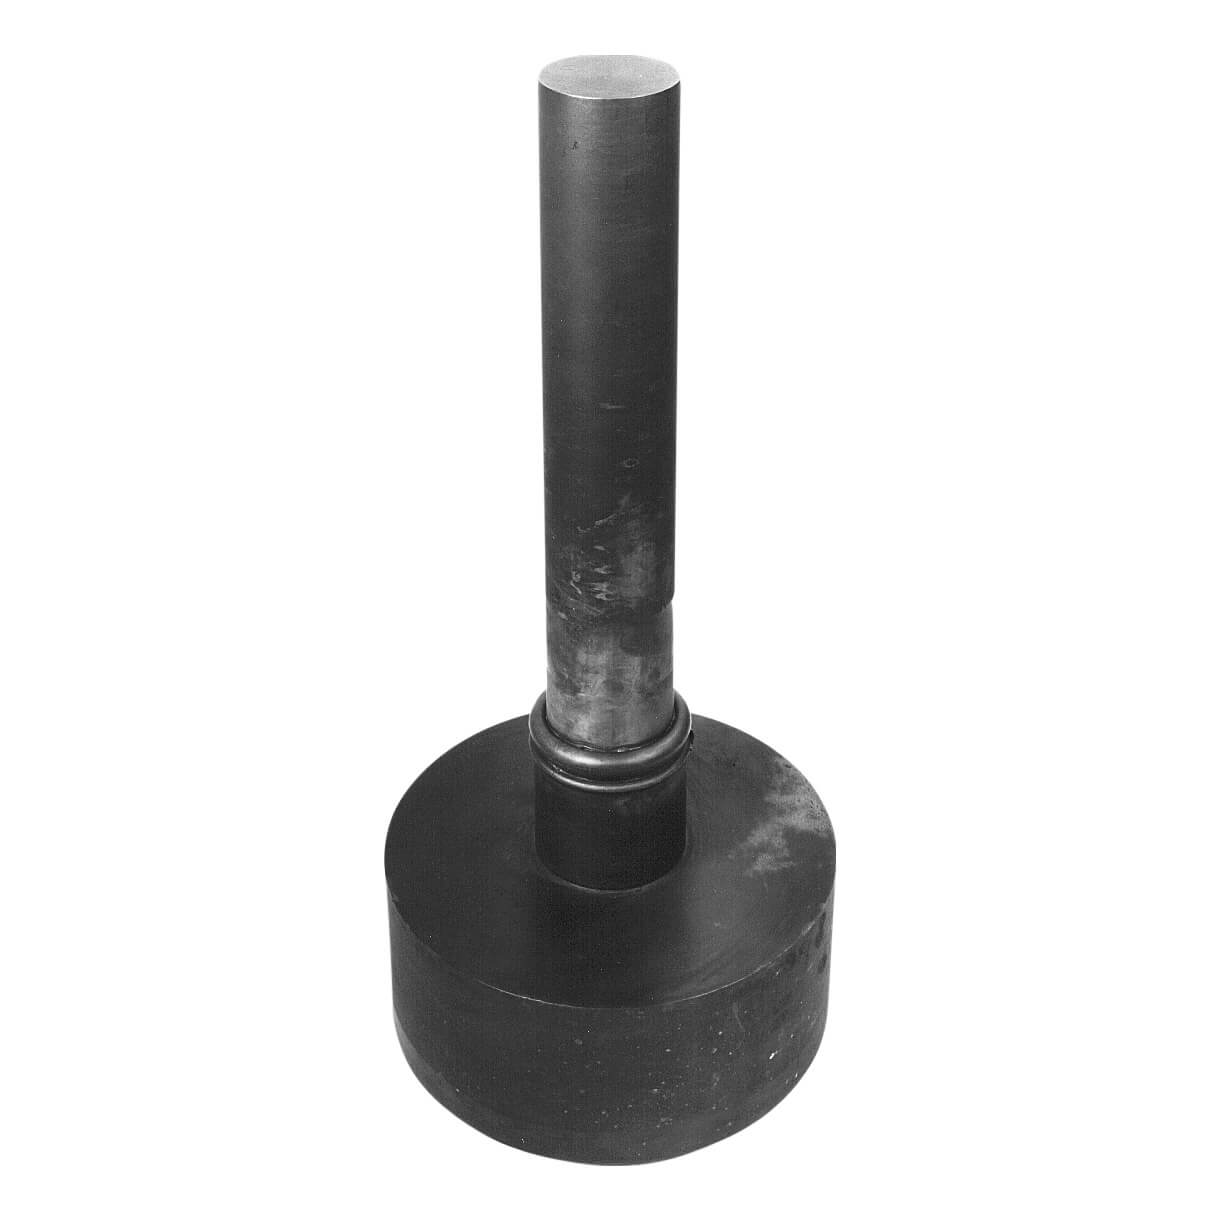 Welded machine tool spindle blank. Replaces costly forging.
